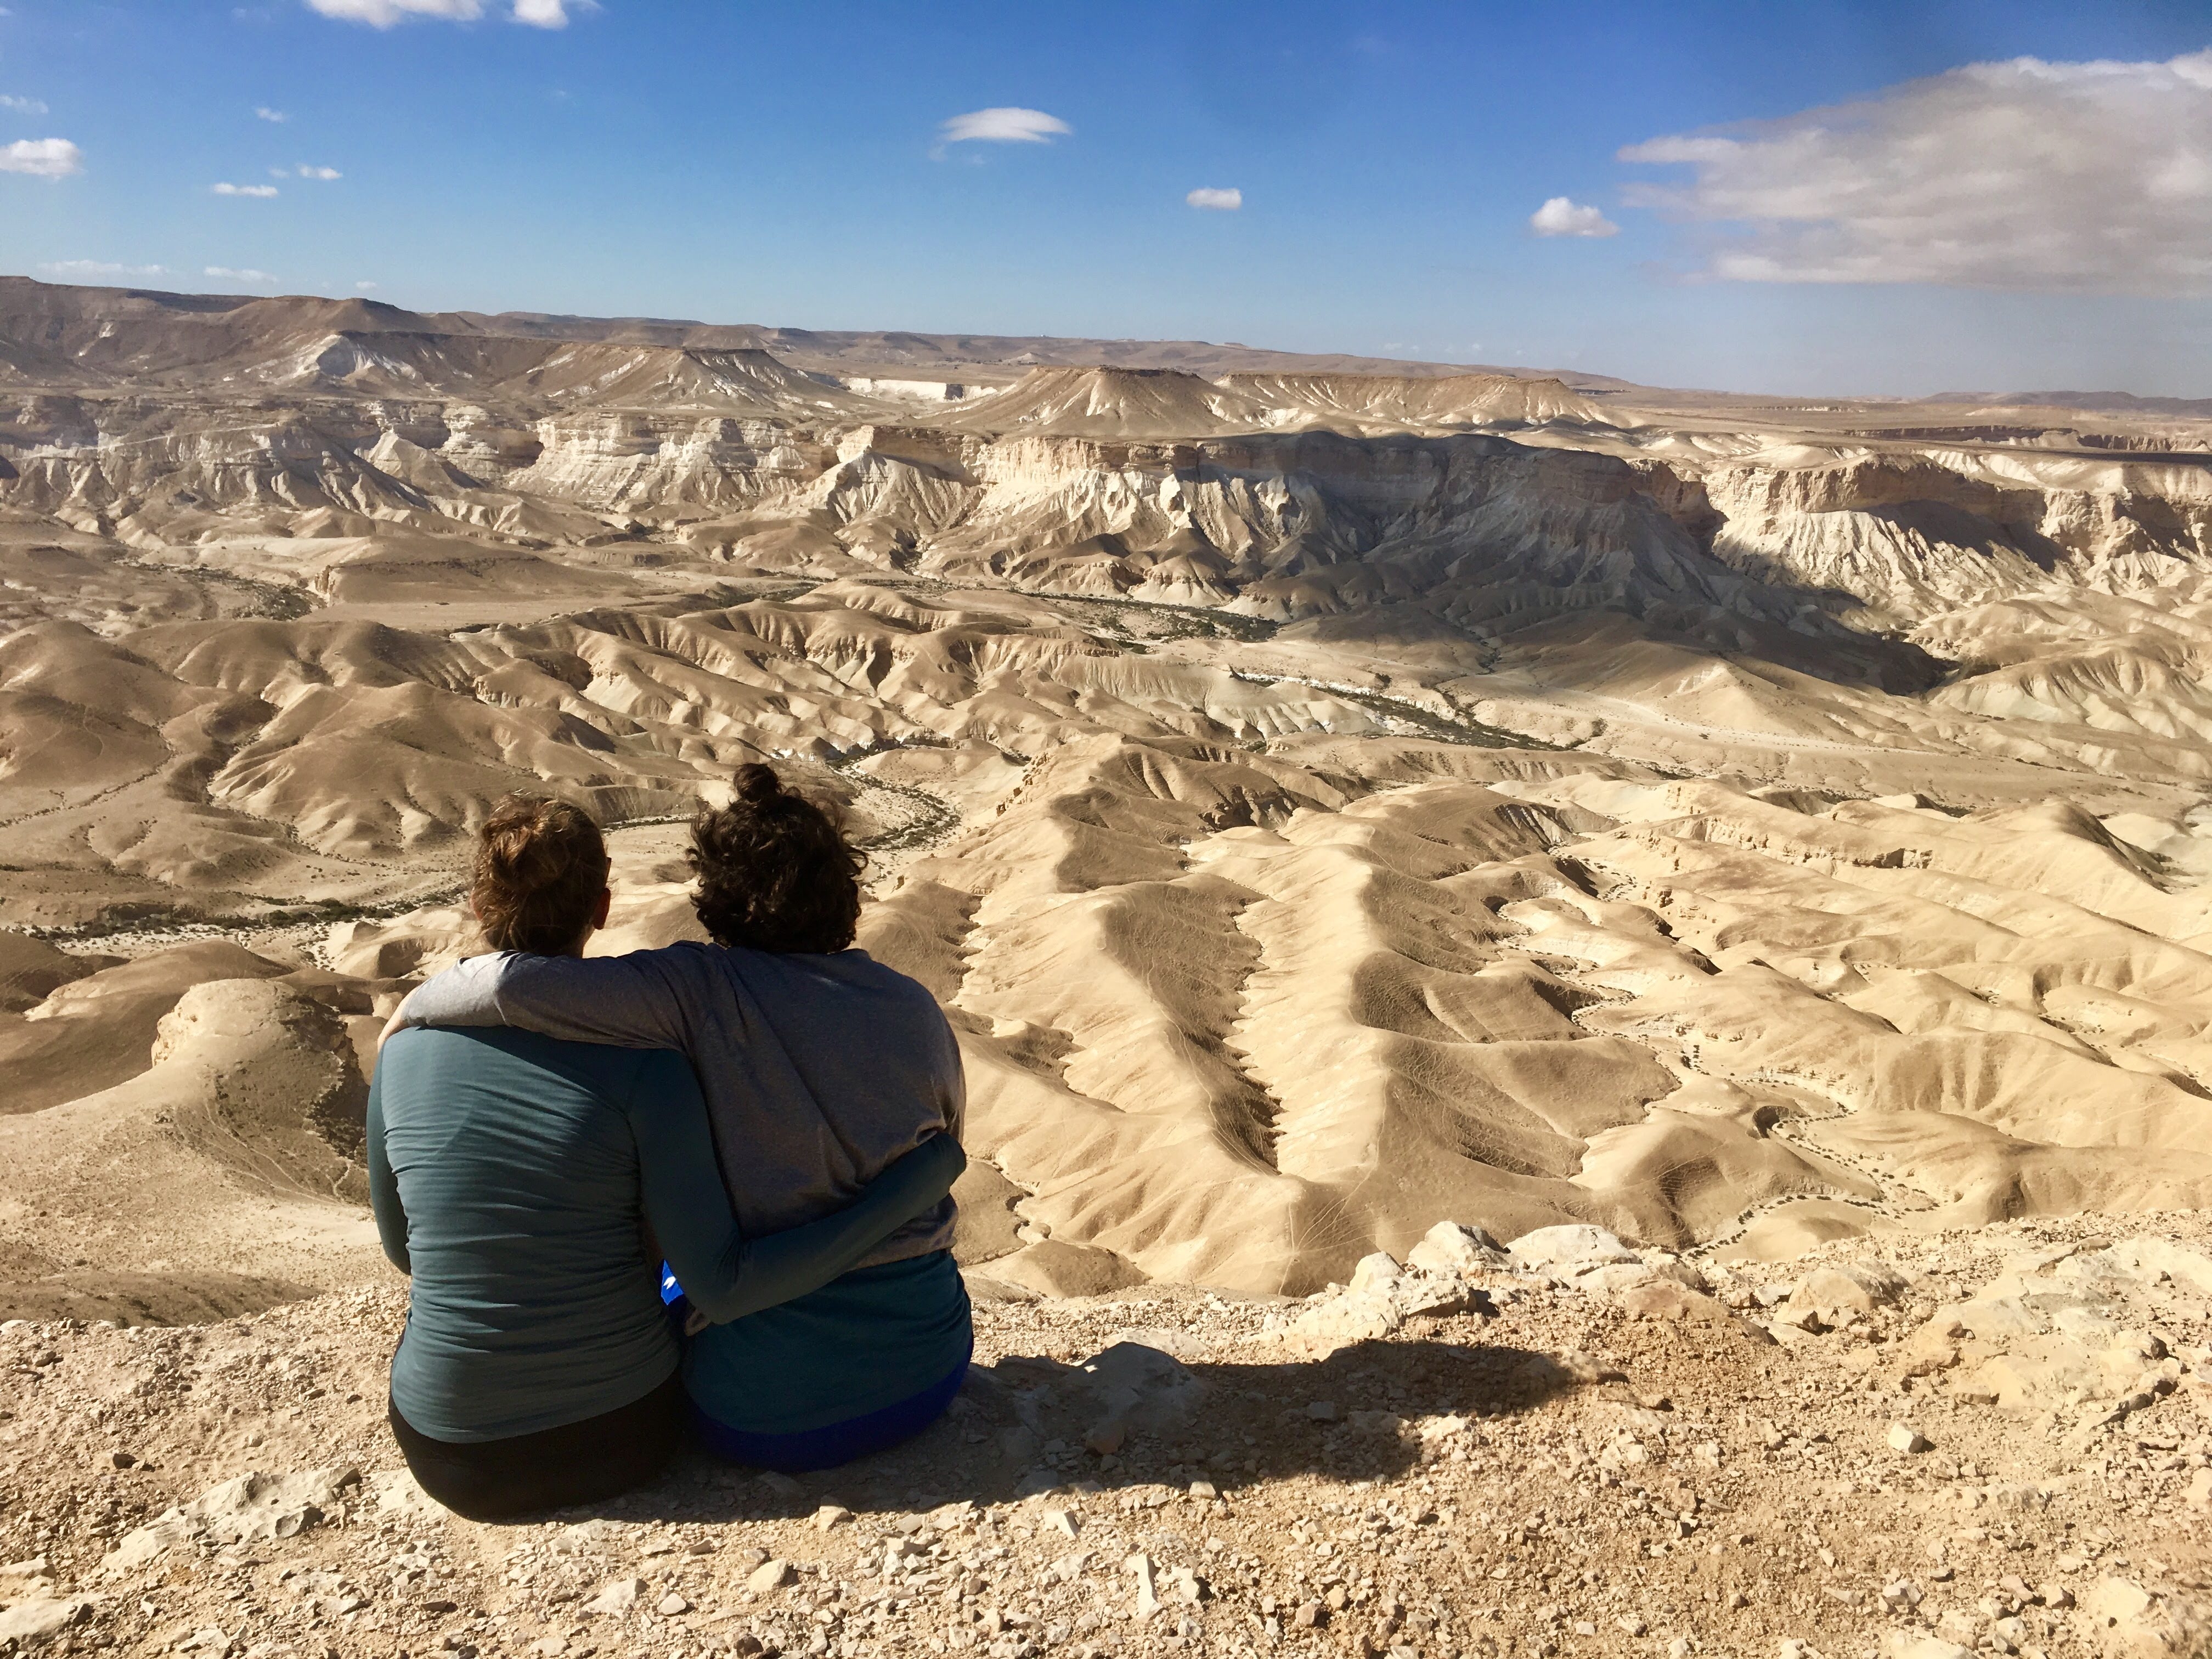 Two people sitting in the desert overlooking the landscape